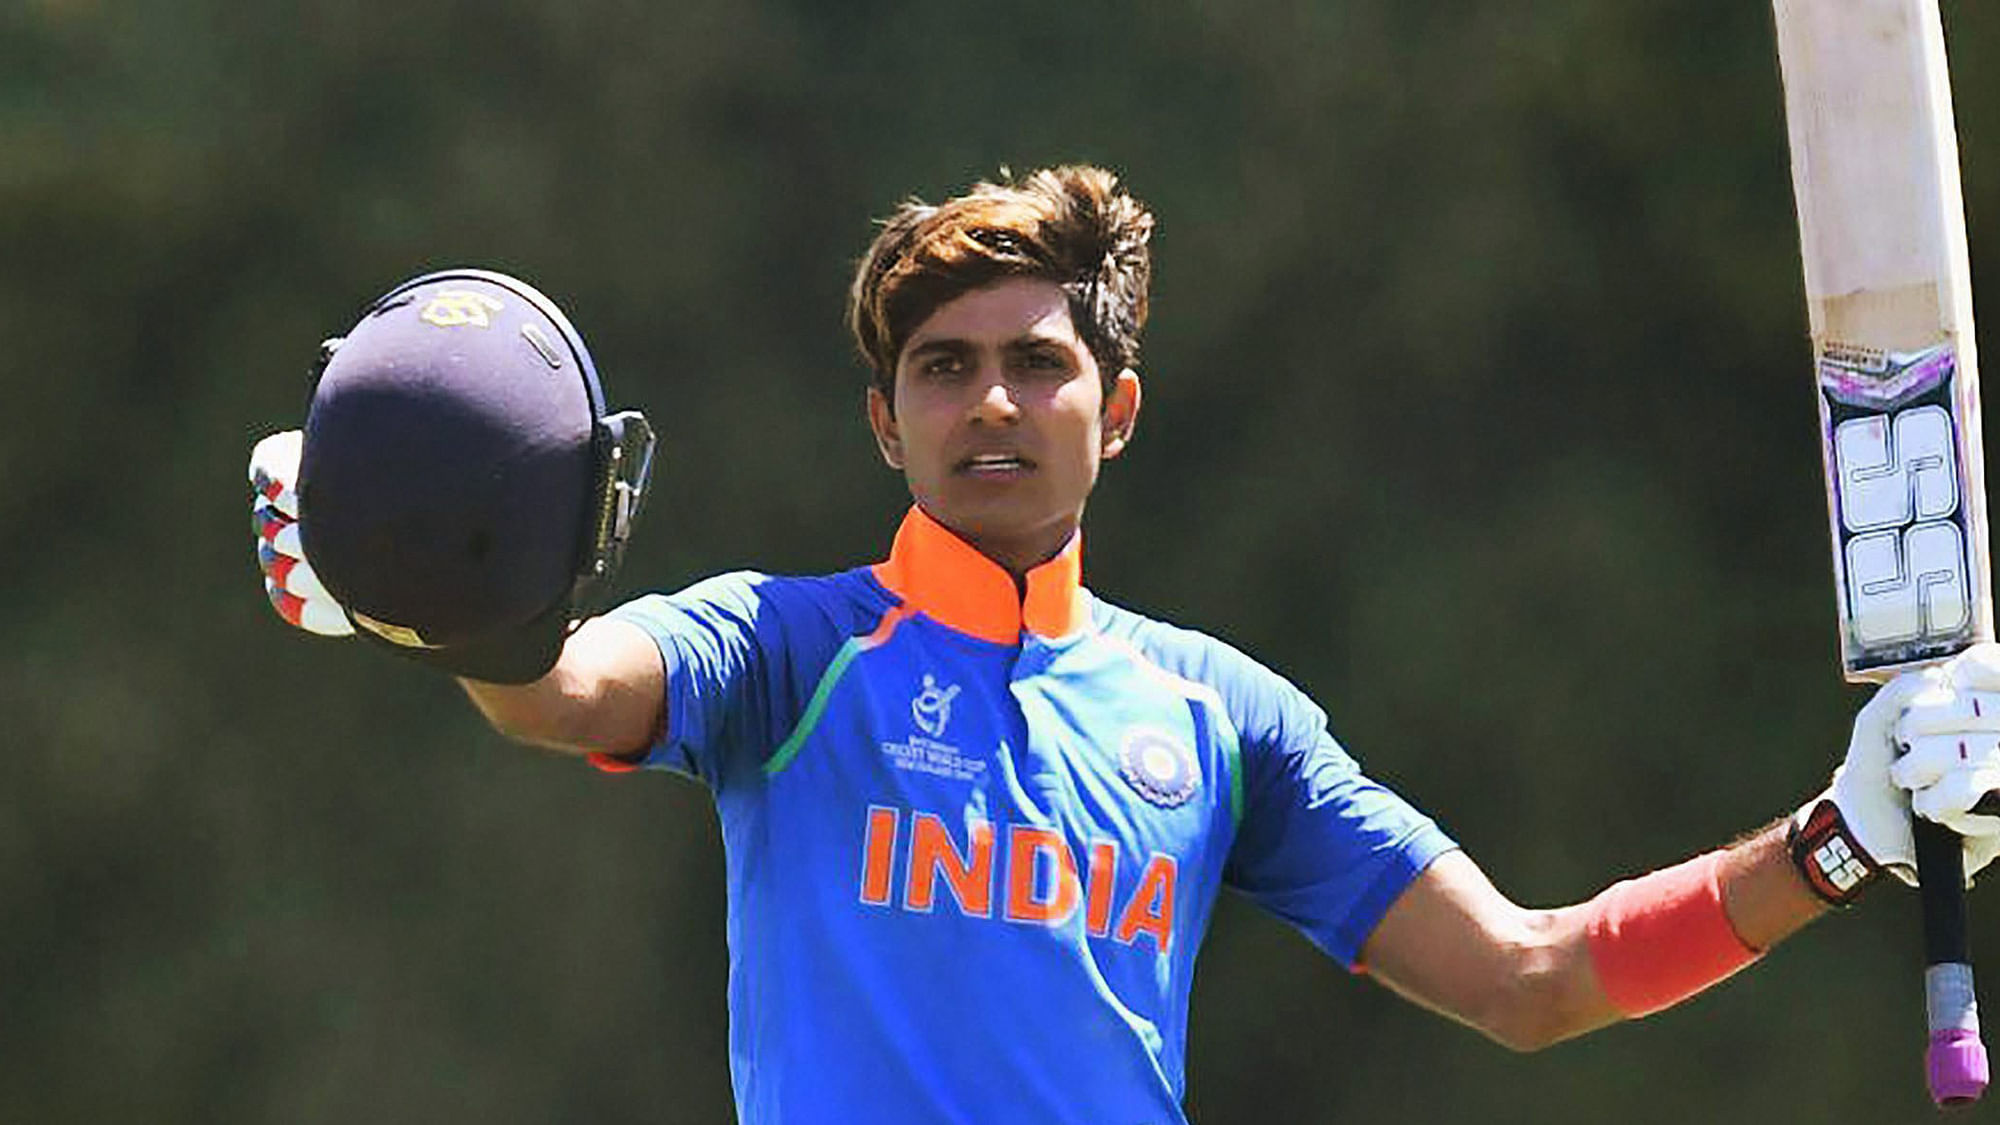 Shubhman Gill has been included in the Indian team for the ongoing tour of New Zealand.